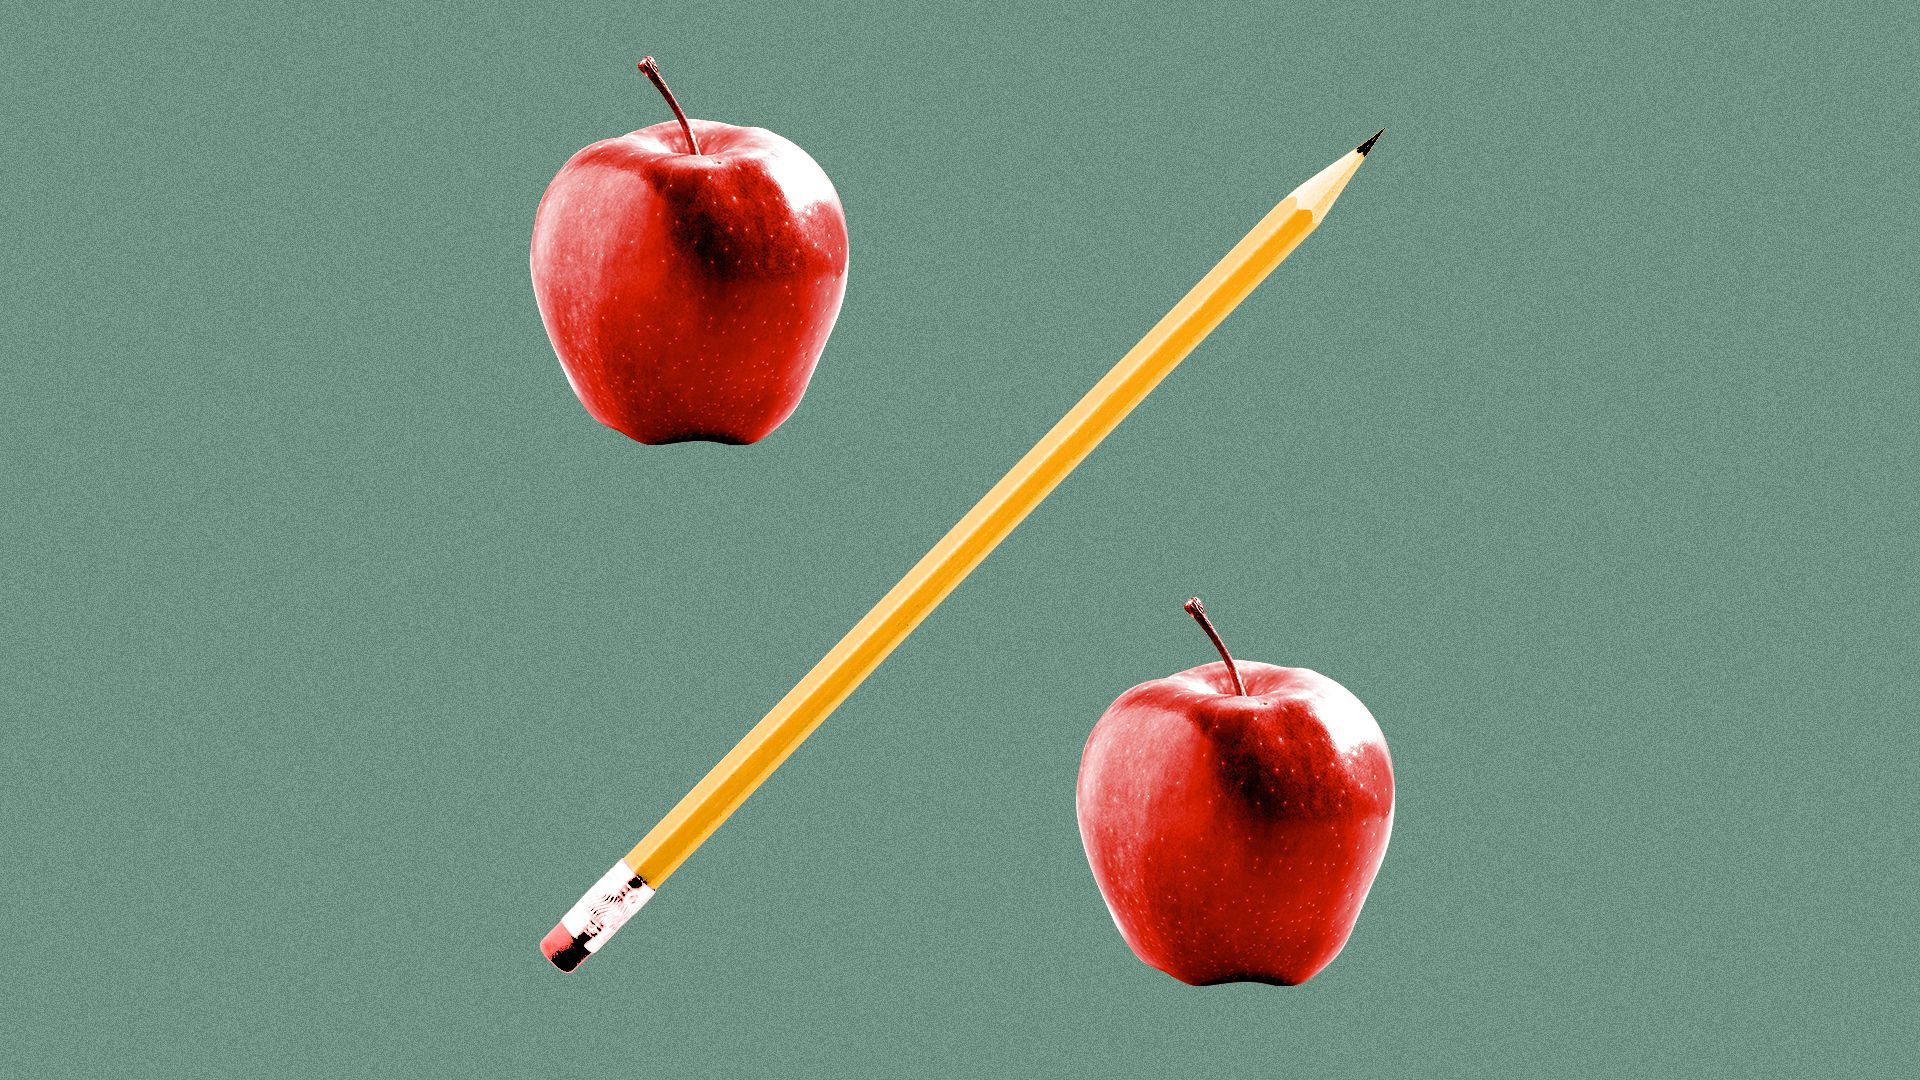 Illustration of a percent sign made out of apples and a pencil.